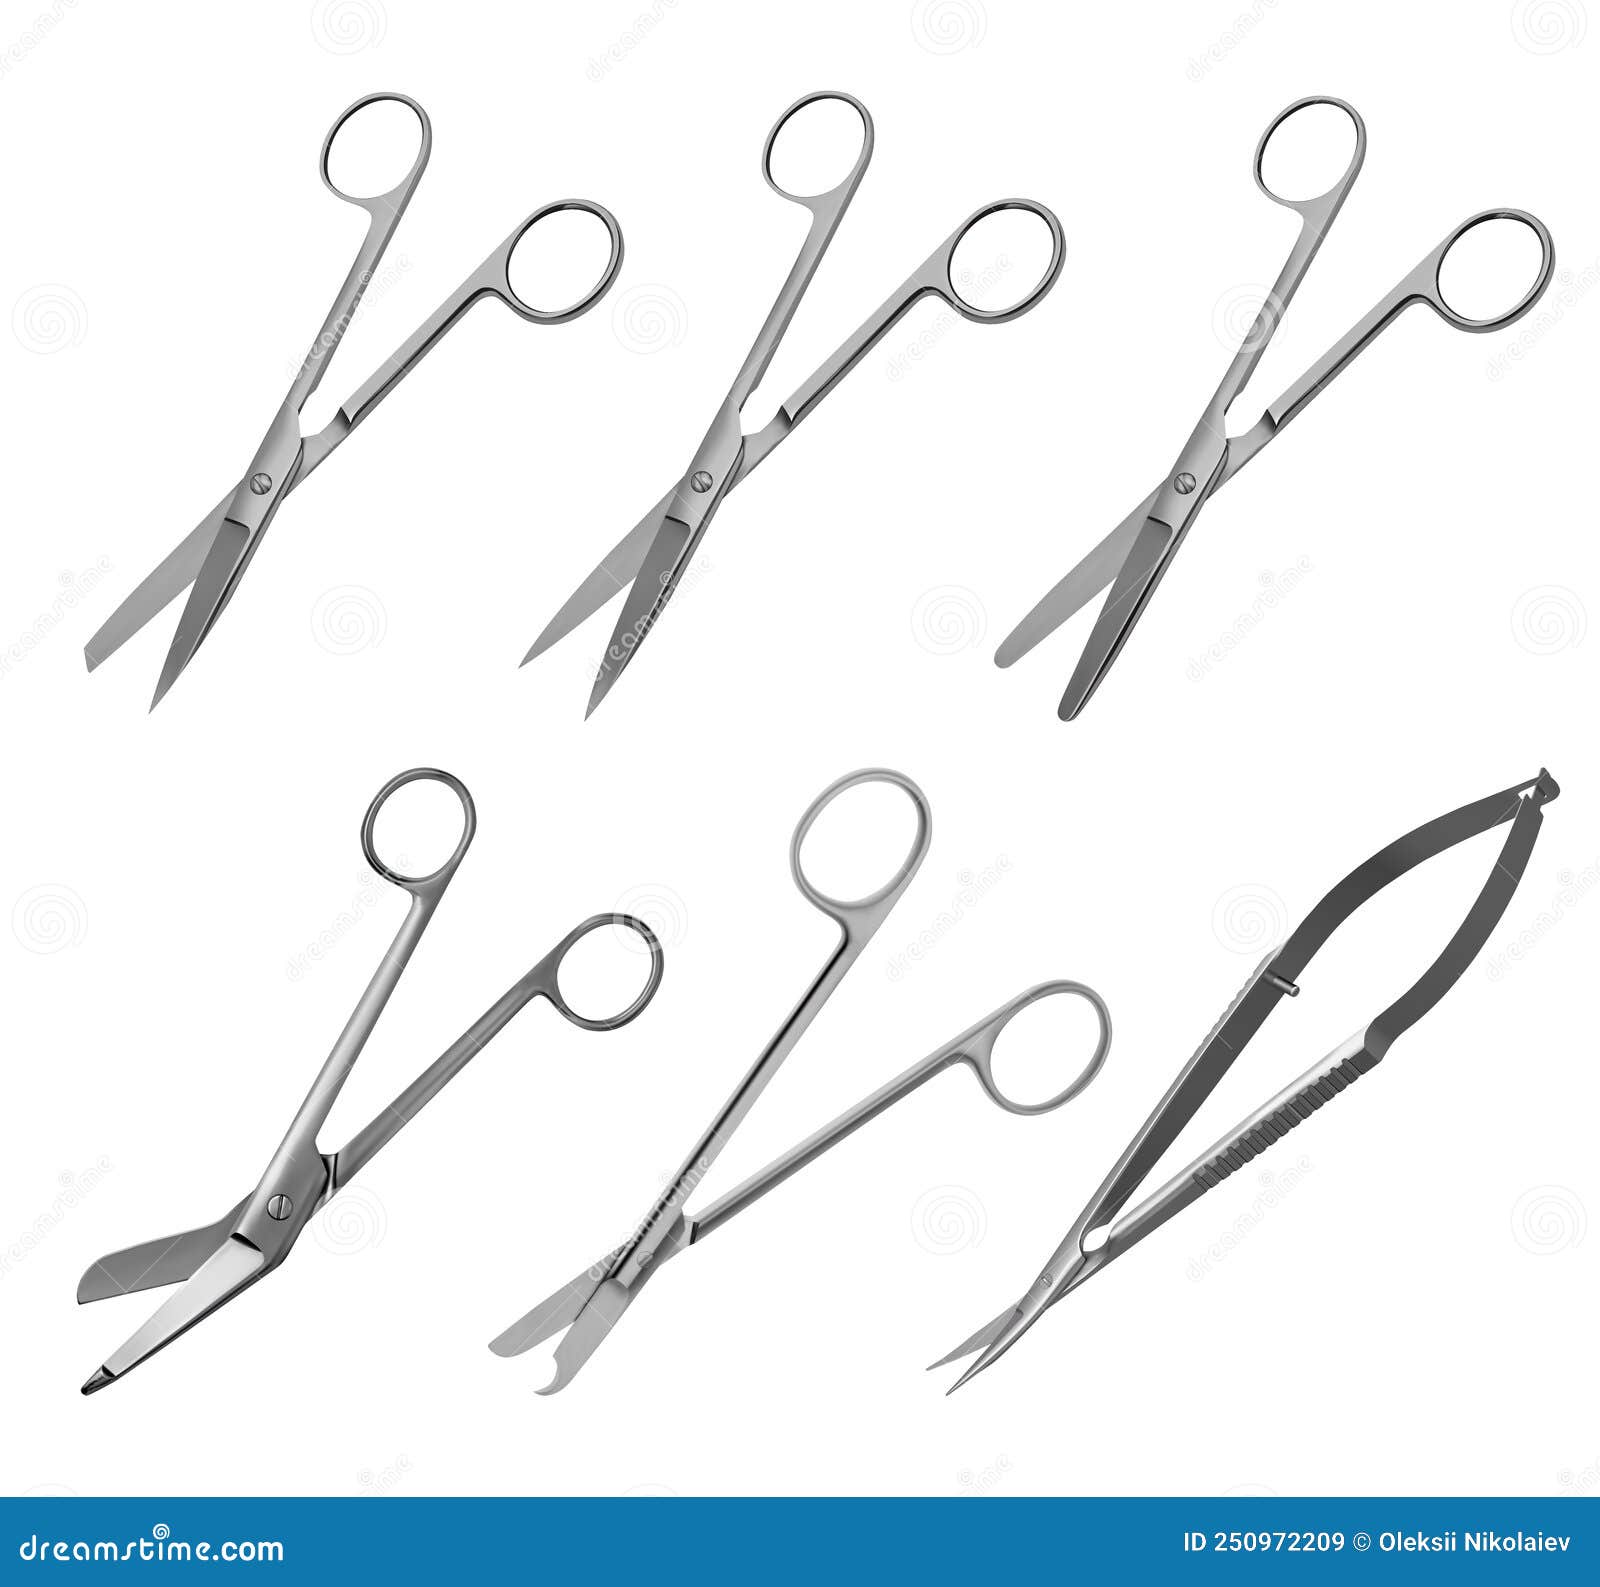 Set of Surgical Articulated Scissors with Various Blade Shapes and ...